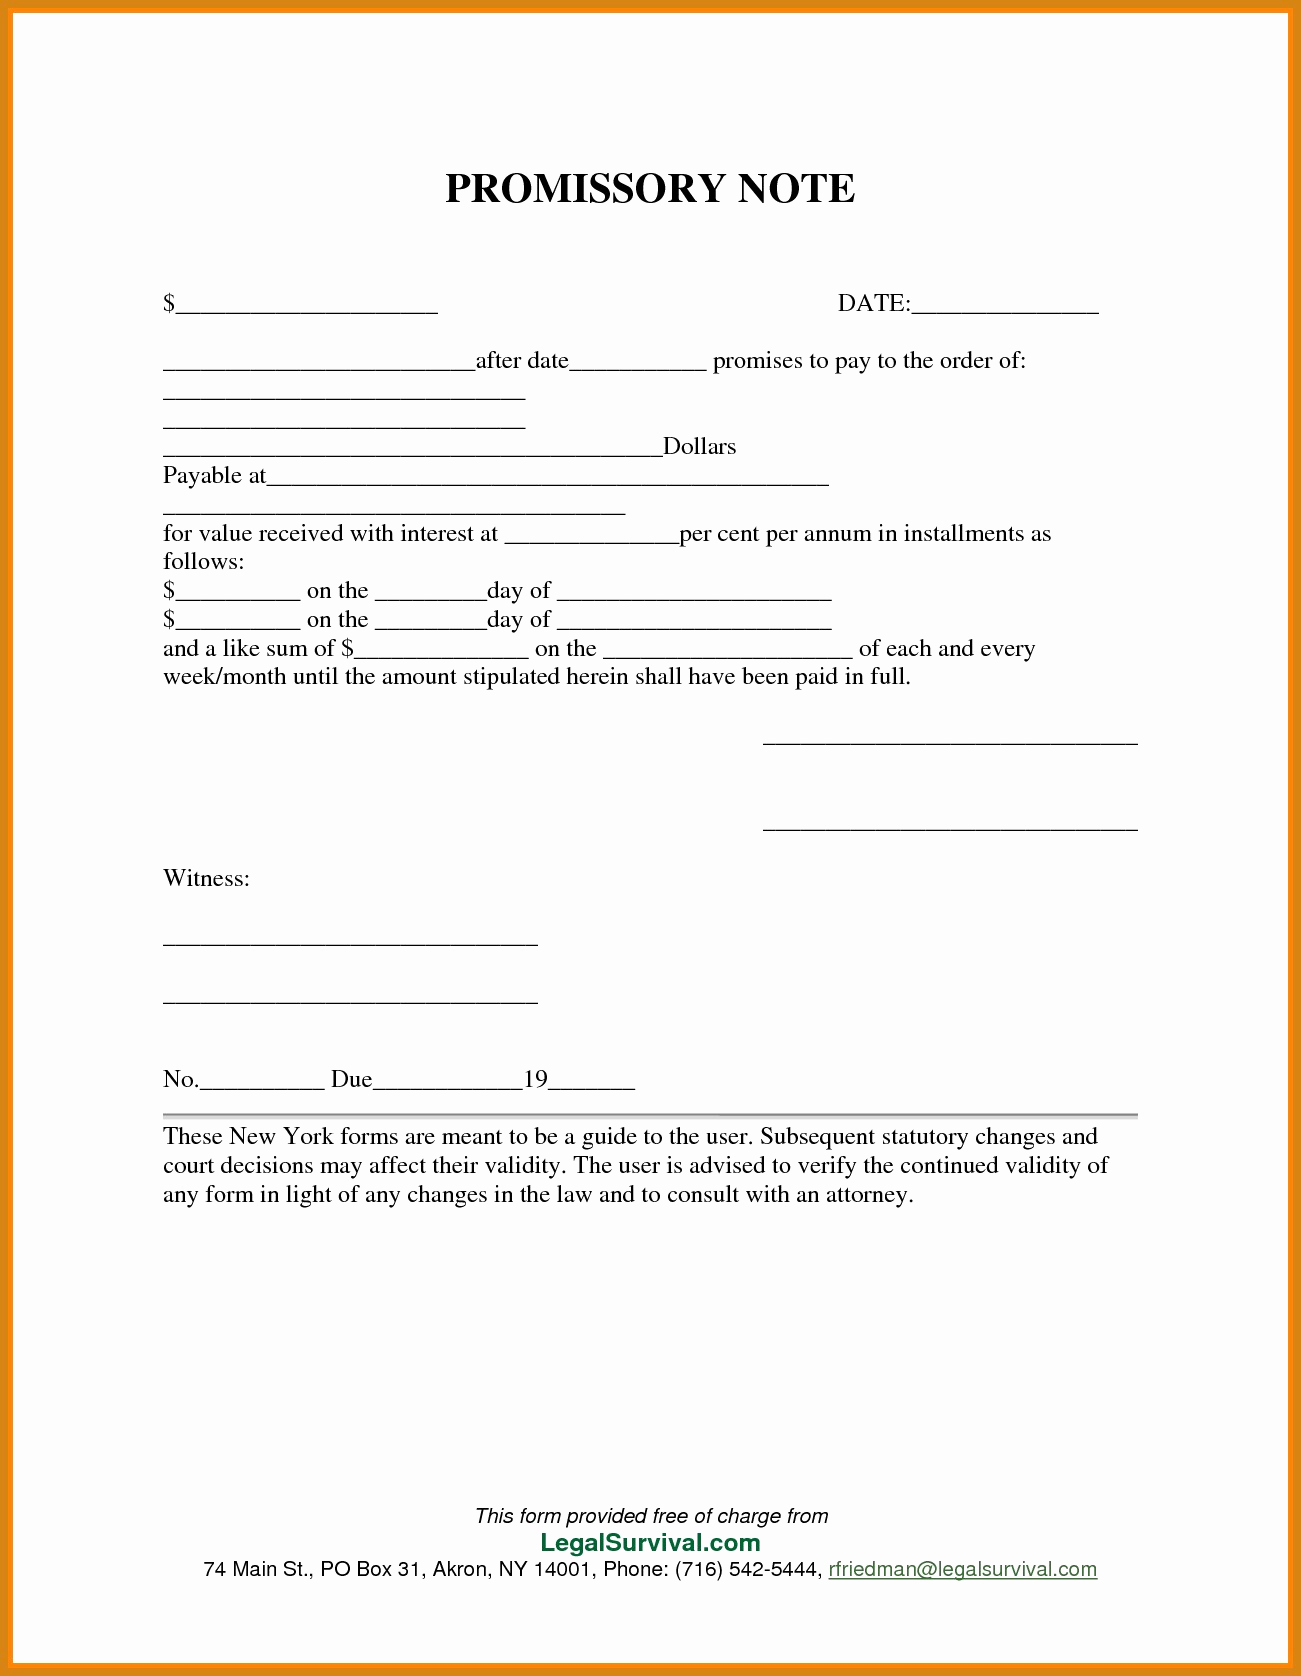 Free Printable Promissory Note Fresh Free Promissory Note Template Pdf Free Download